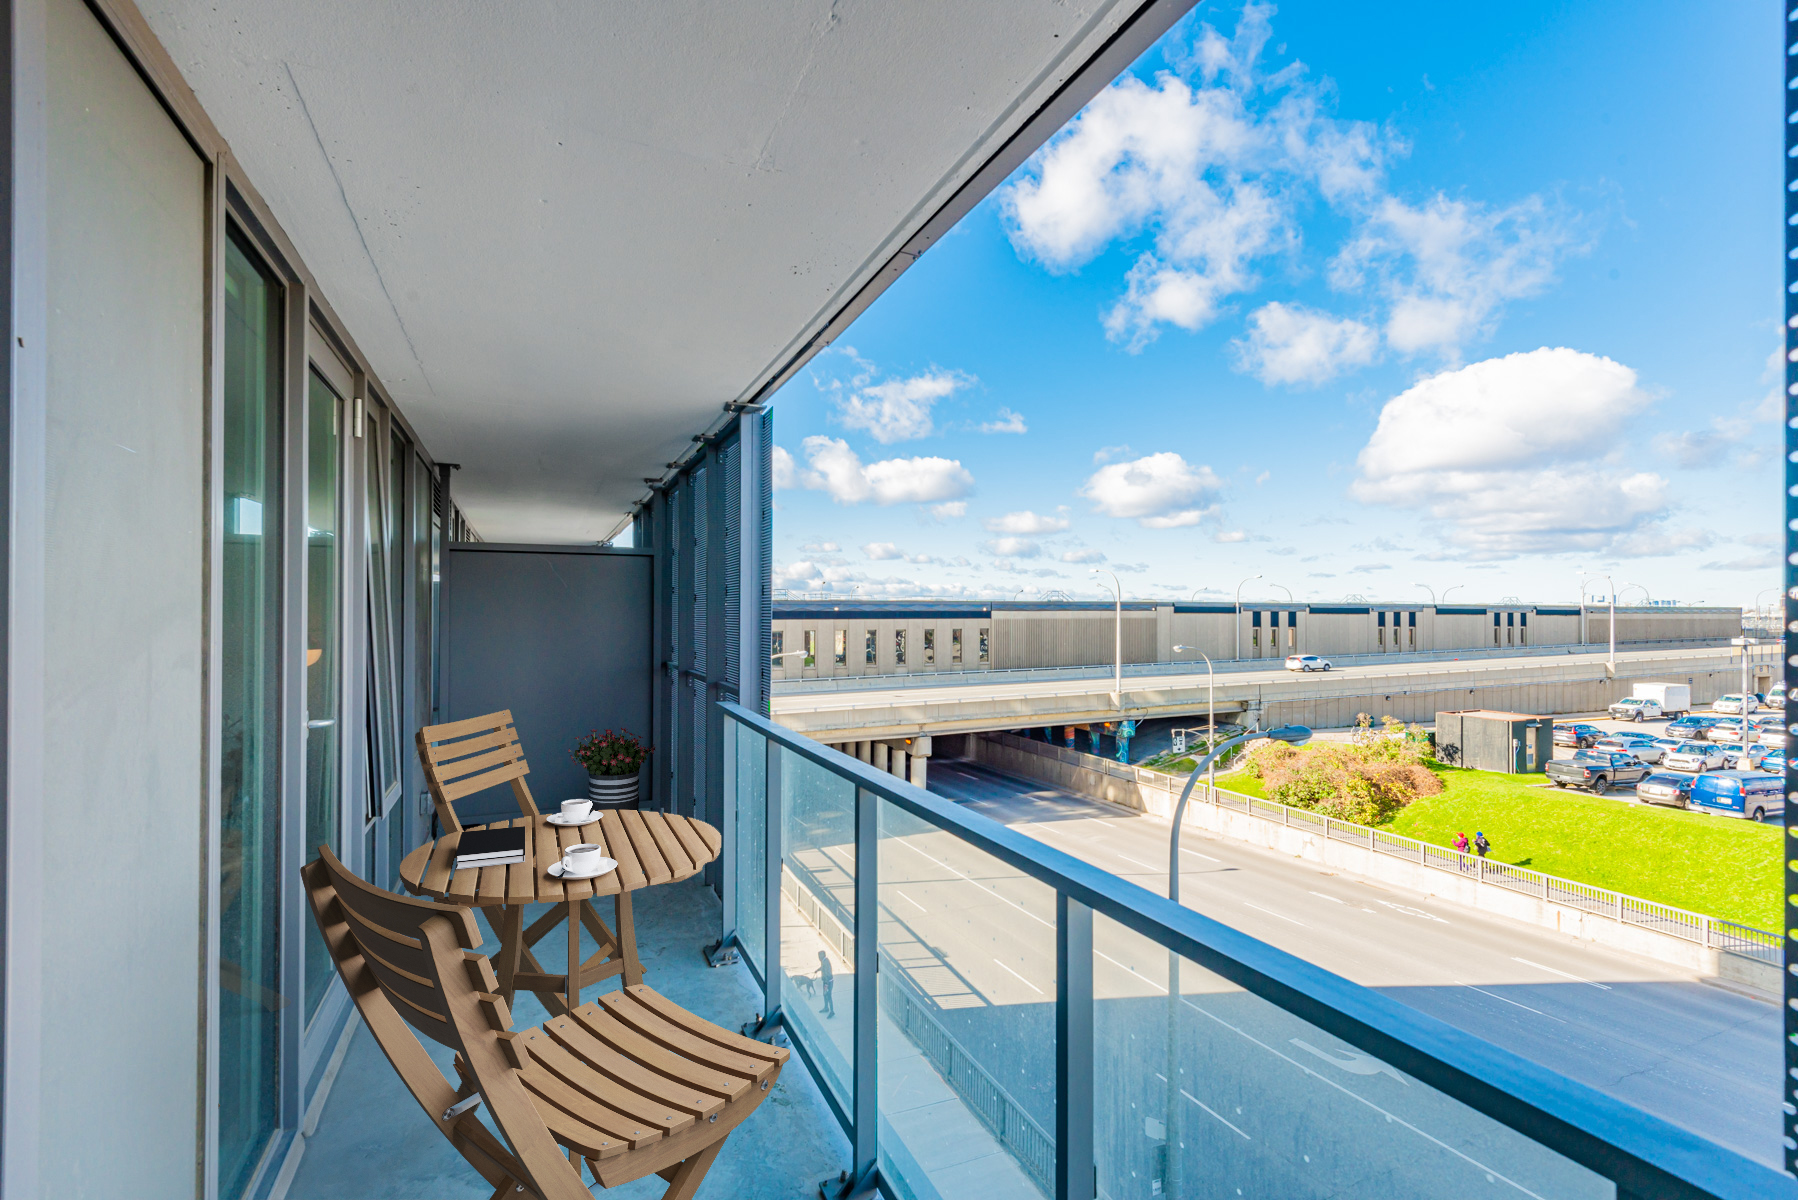 Long condo balcony with patio table and chairs – 38 Monte Kwinter Court Unit 423.